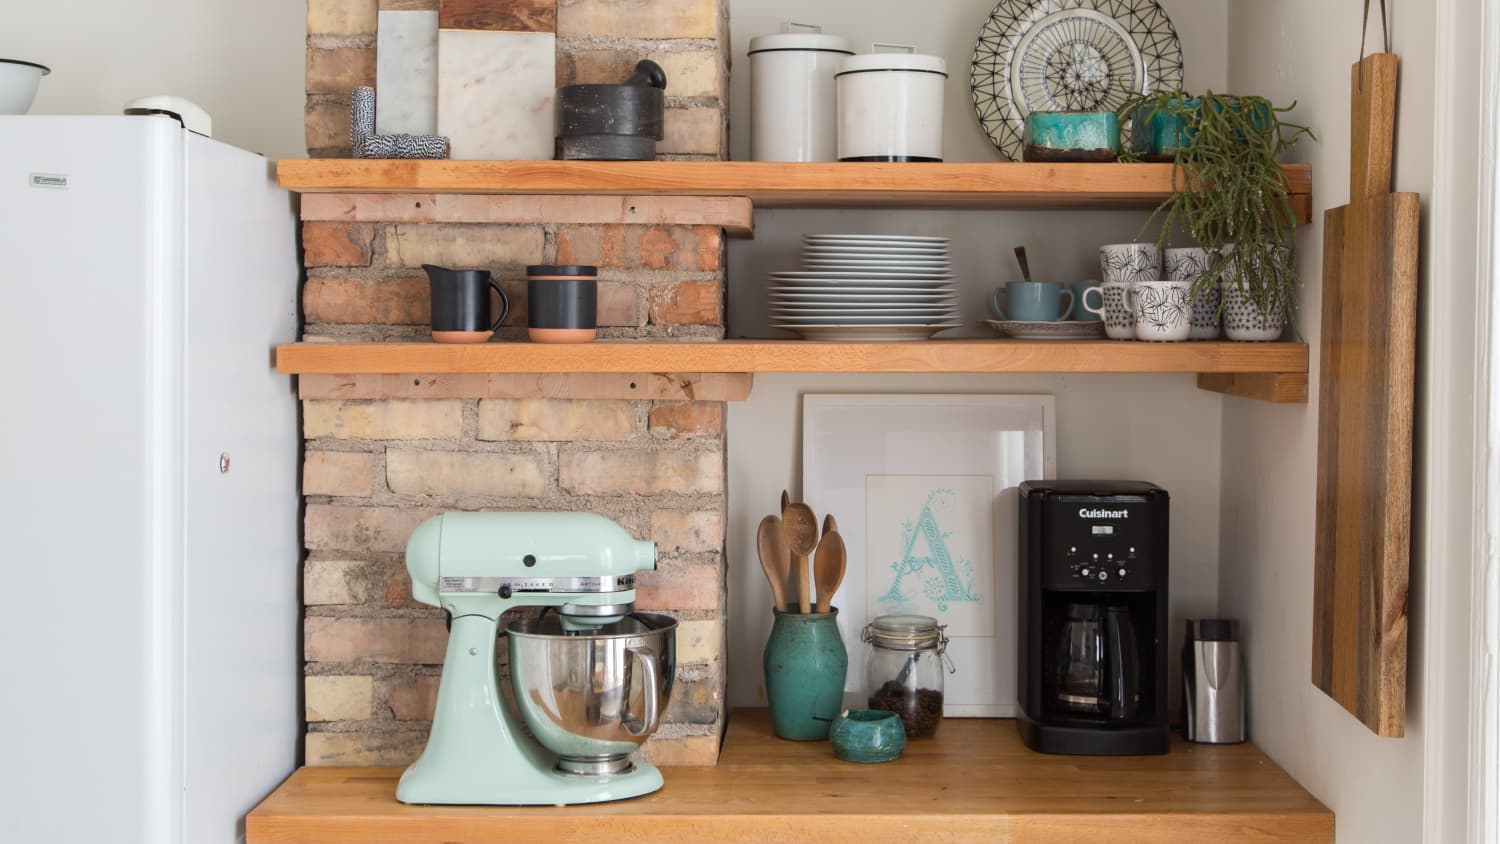 The 10 Basic Kitchen Appliances Every Family Needs